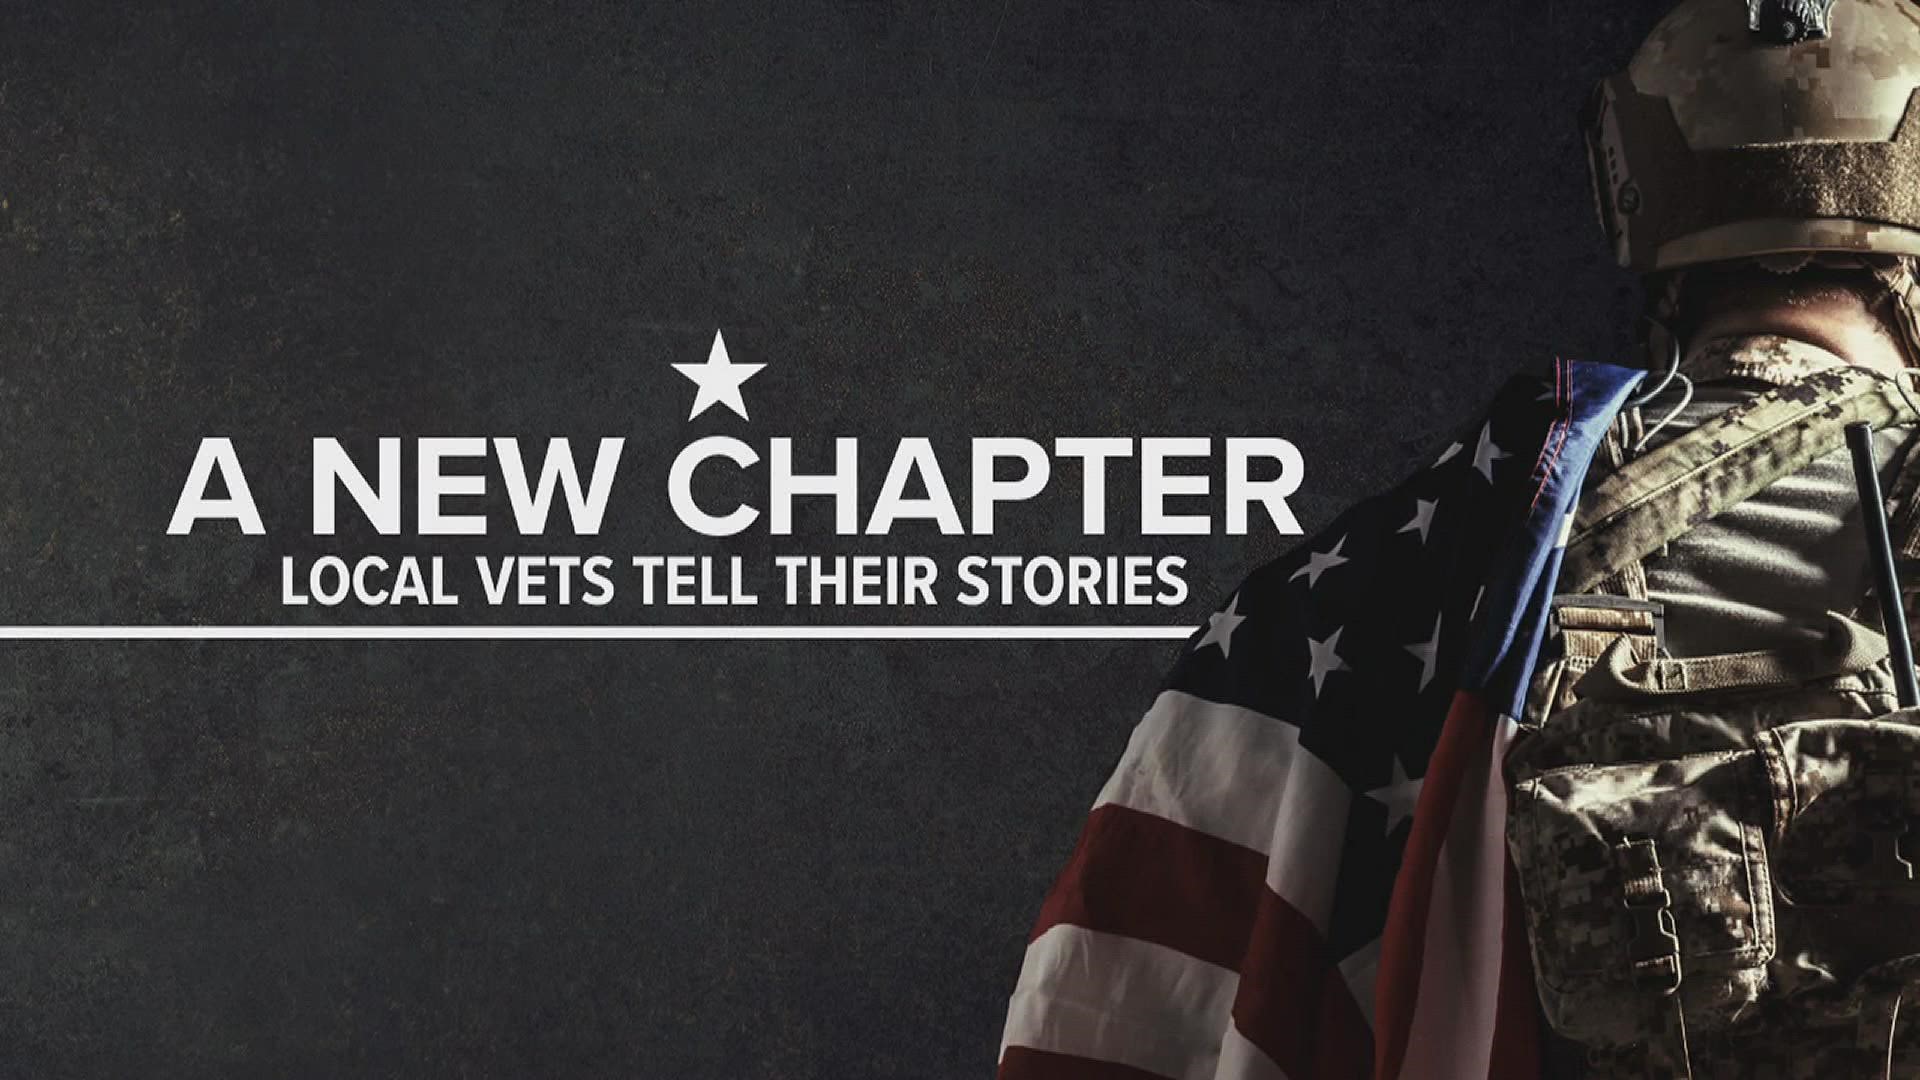 FOX43 spoke to veterans who have served throughout the years about their experience on active duty and returning home.